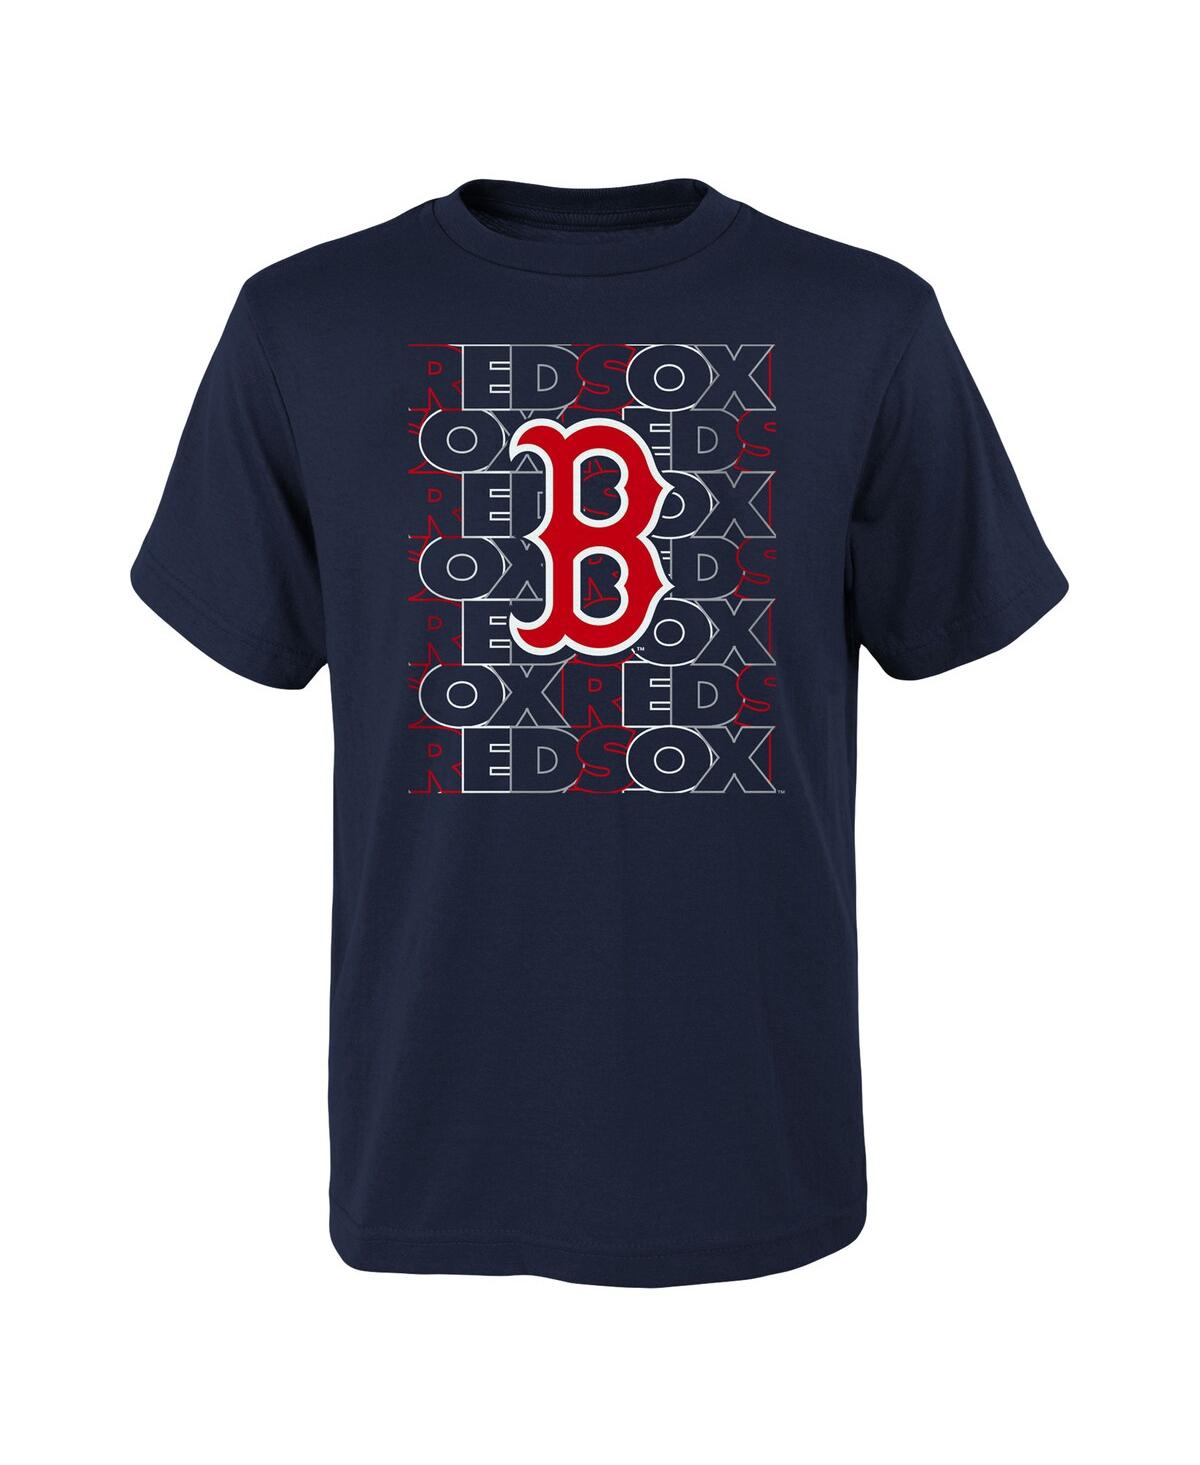 Outerstuff Kids' Big Boys And Girls Navy Boston Red Sox Letterman T-shirt